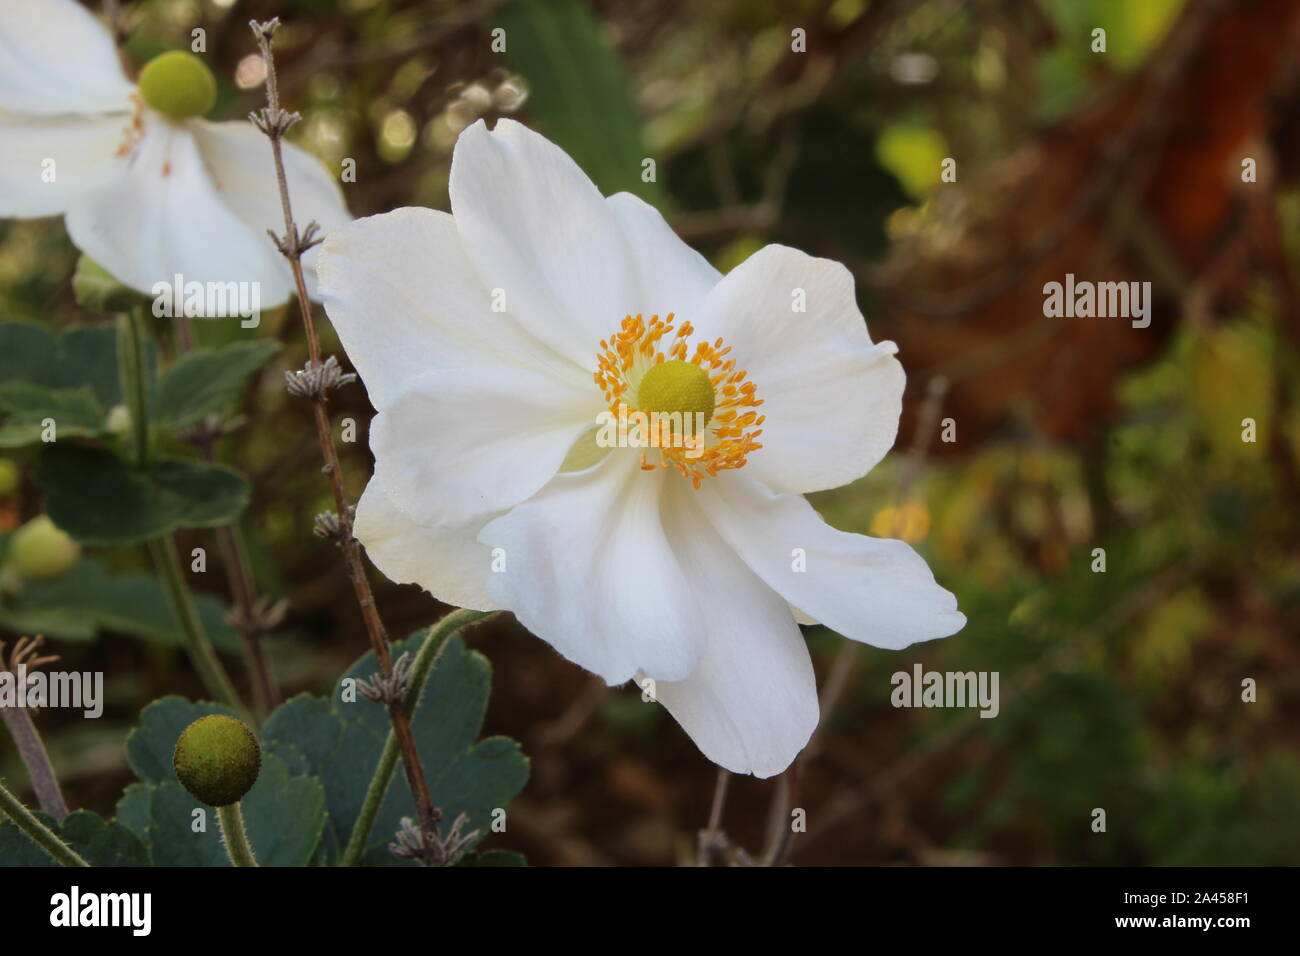 A white Anemone on a green and brown background Stock Photo